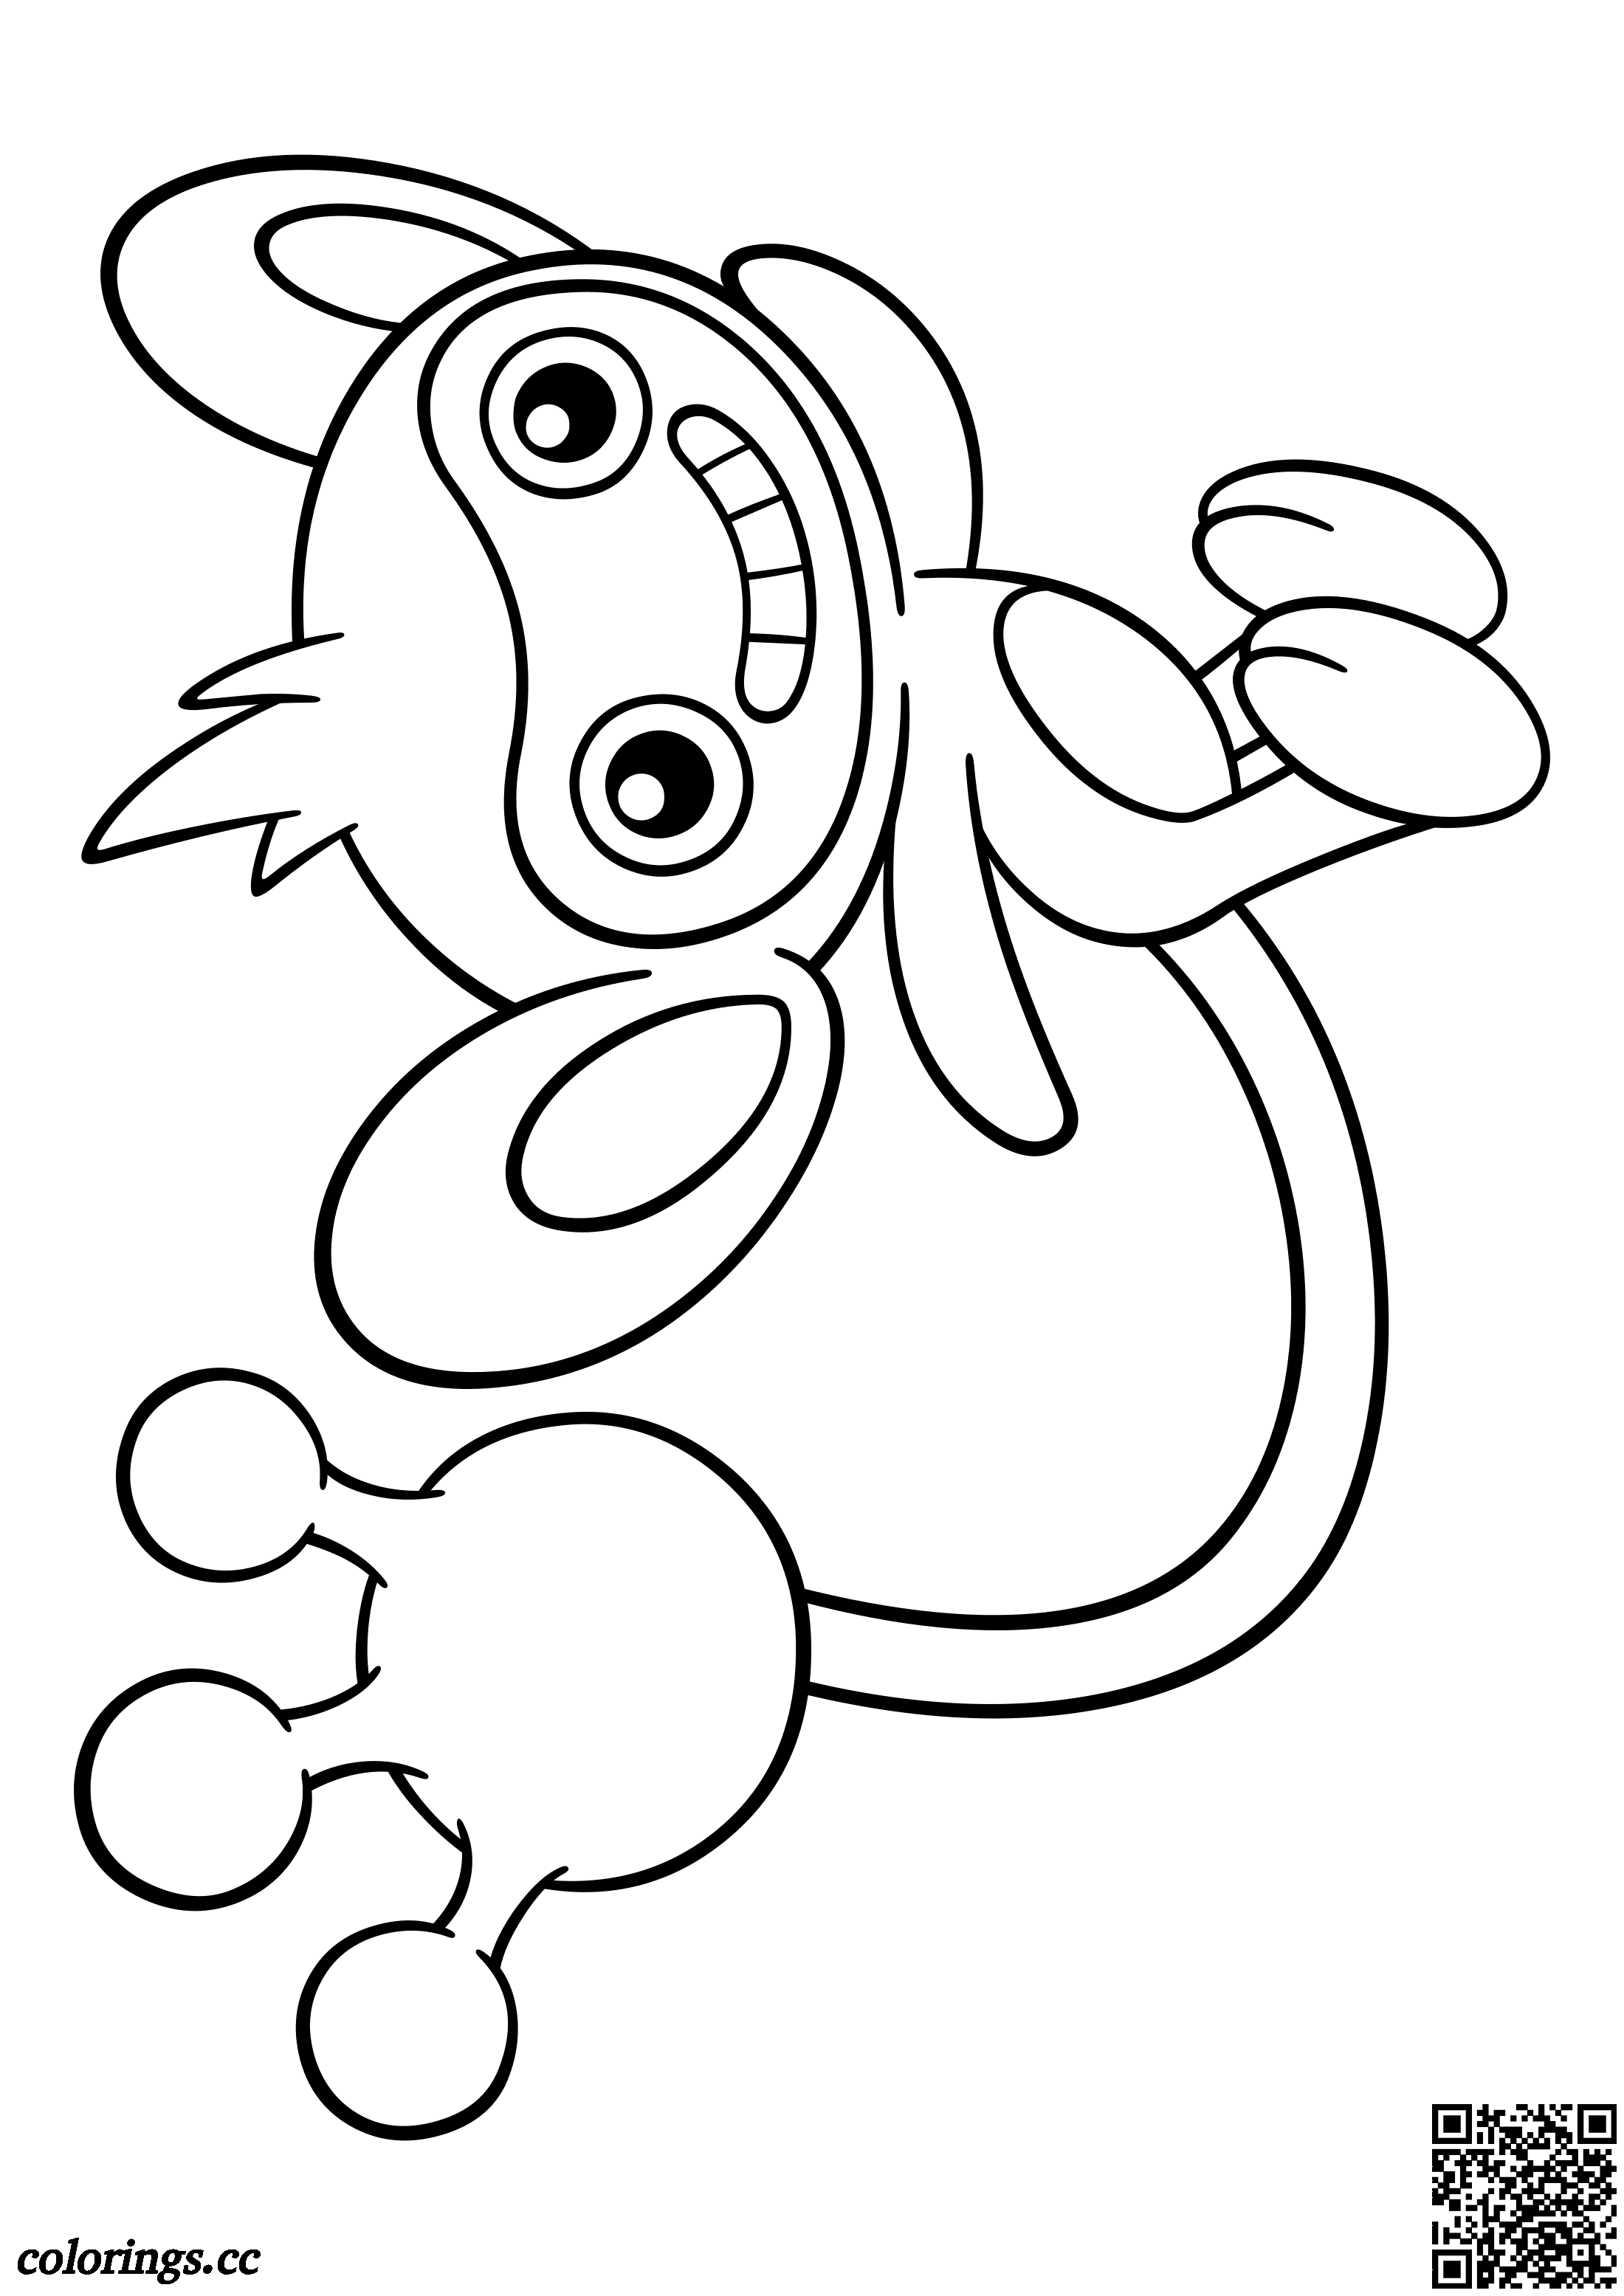 42 Best Ideas For Coloring Aipom Coloring Pages